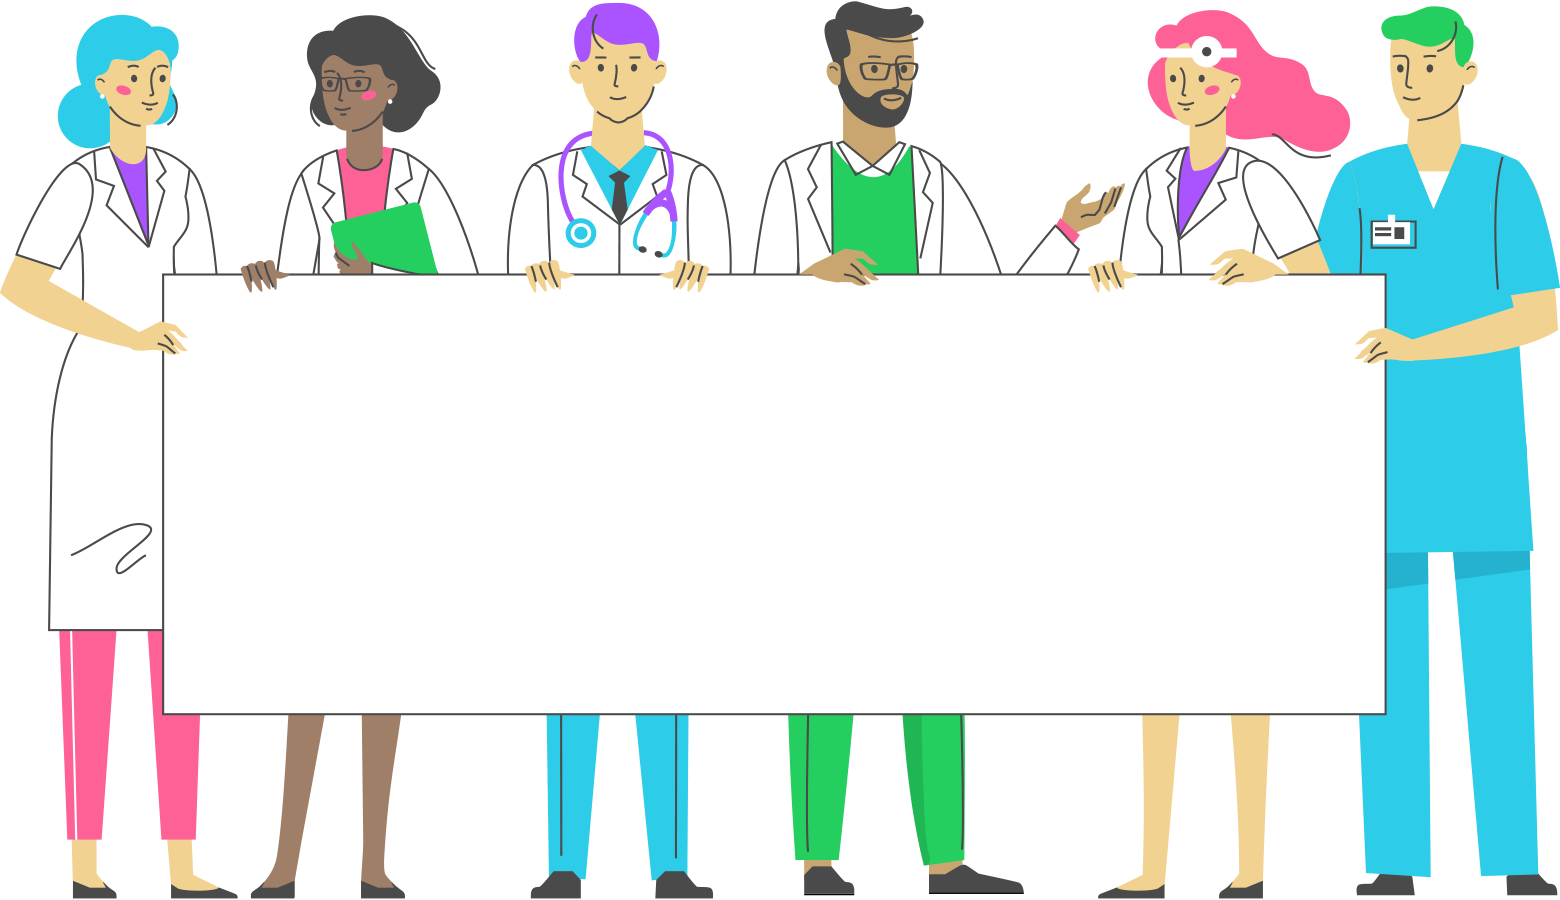 colorful illustration of veterinary professionals holding a sign